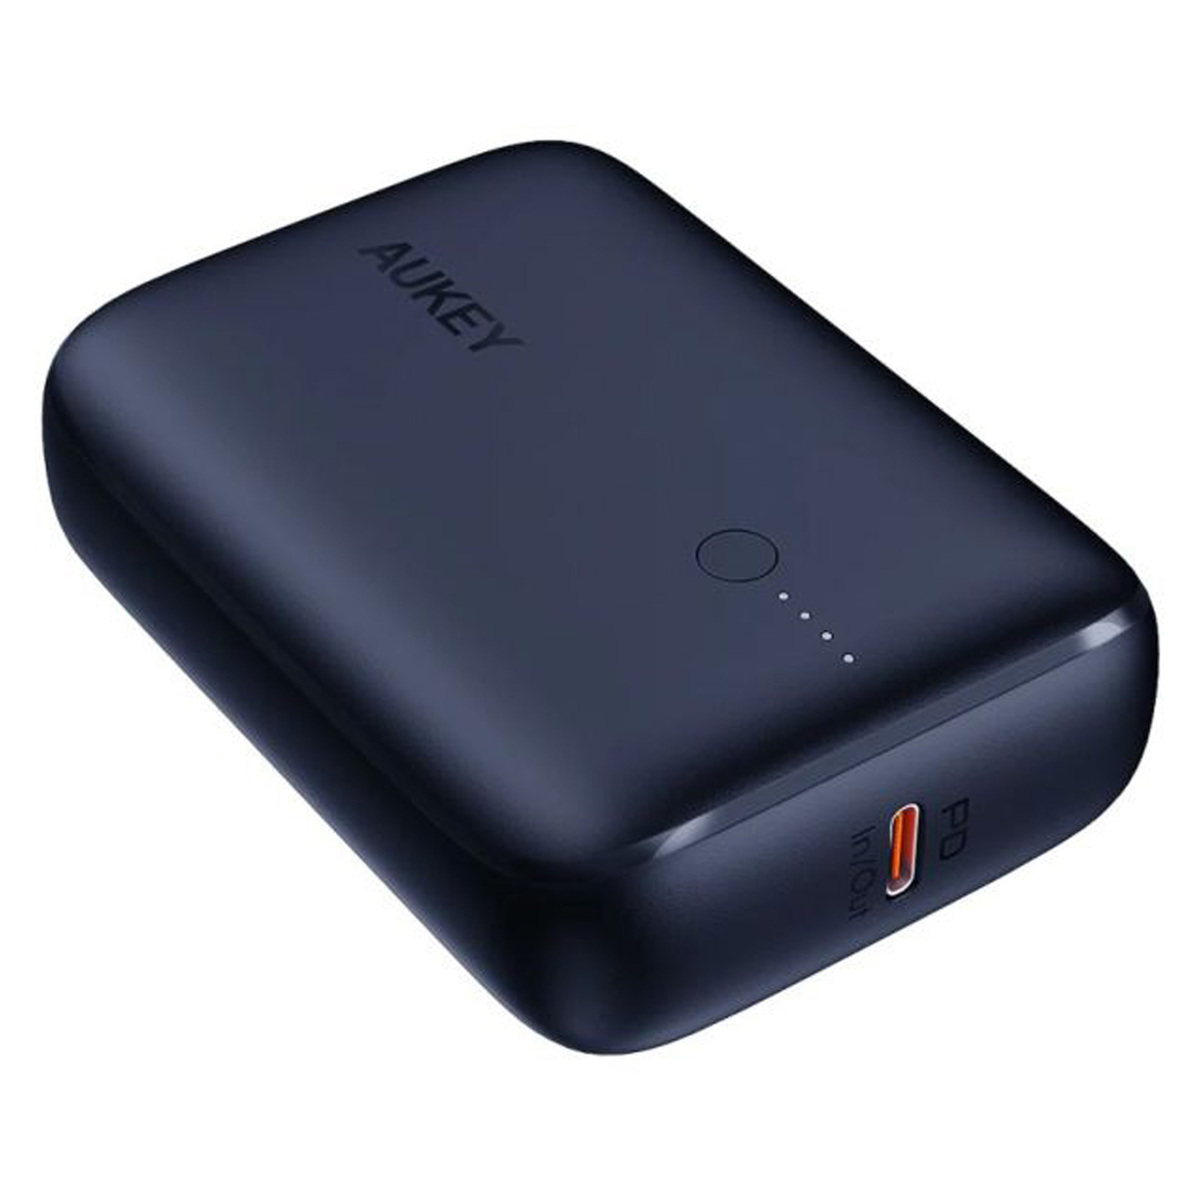 Aukey Power Bank Portable Charger, 10000mAh Battery Capacity, 20W Power Delivery, Intelligent Safety Protection, Quick Charge 3.0, Ultra Compact, Broad Compatibility,Blue-PB-N83S